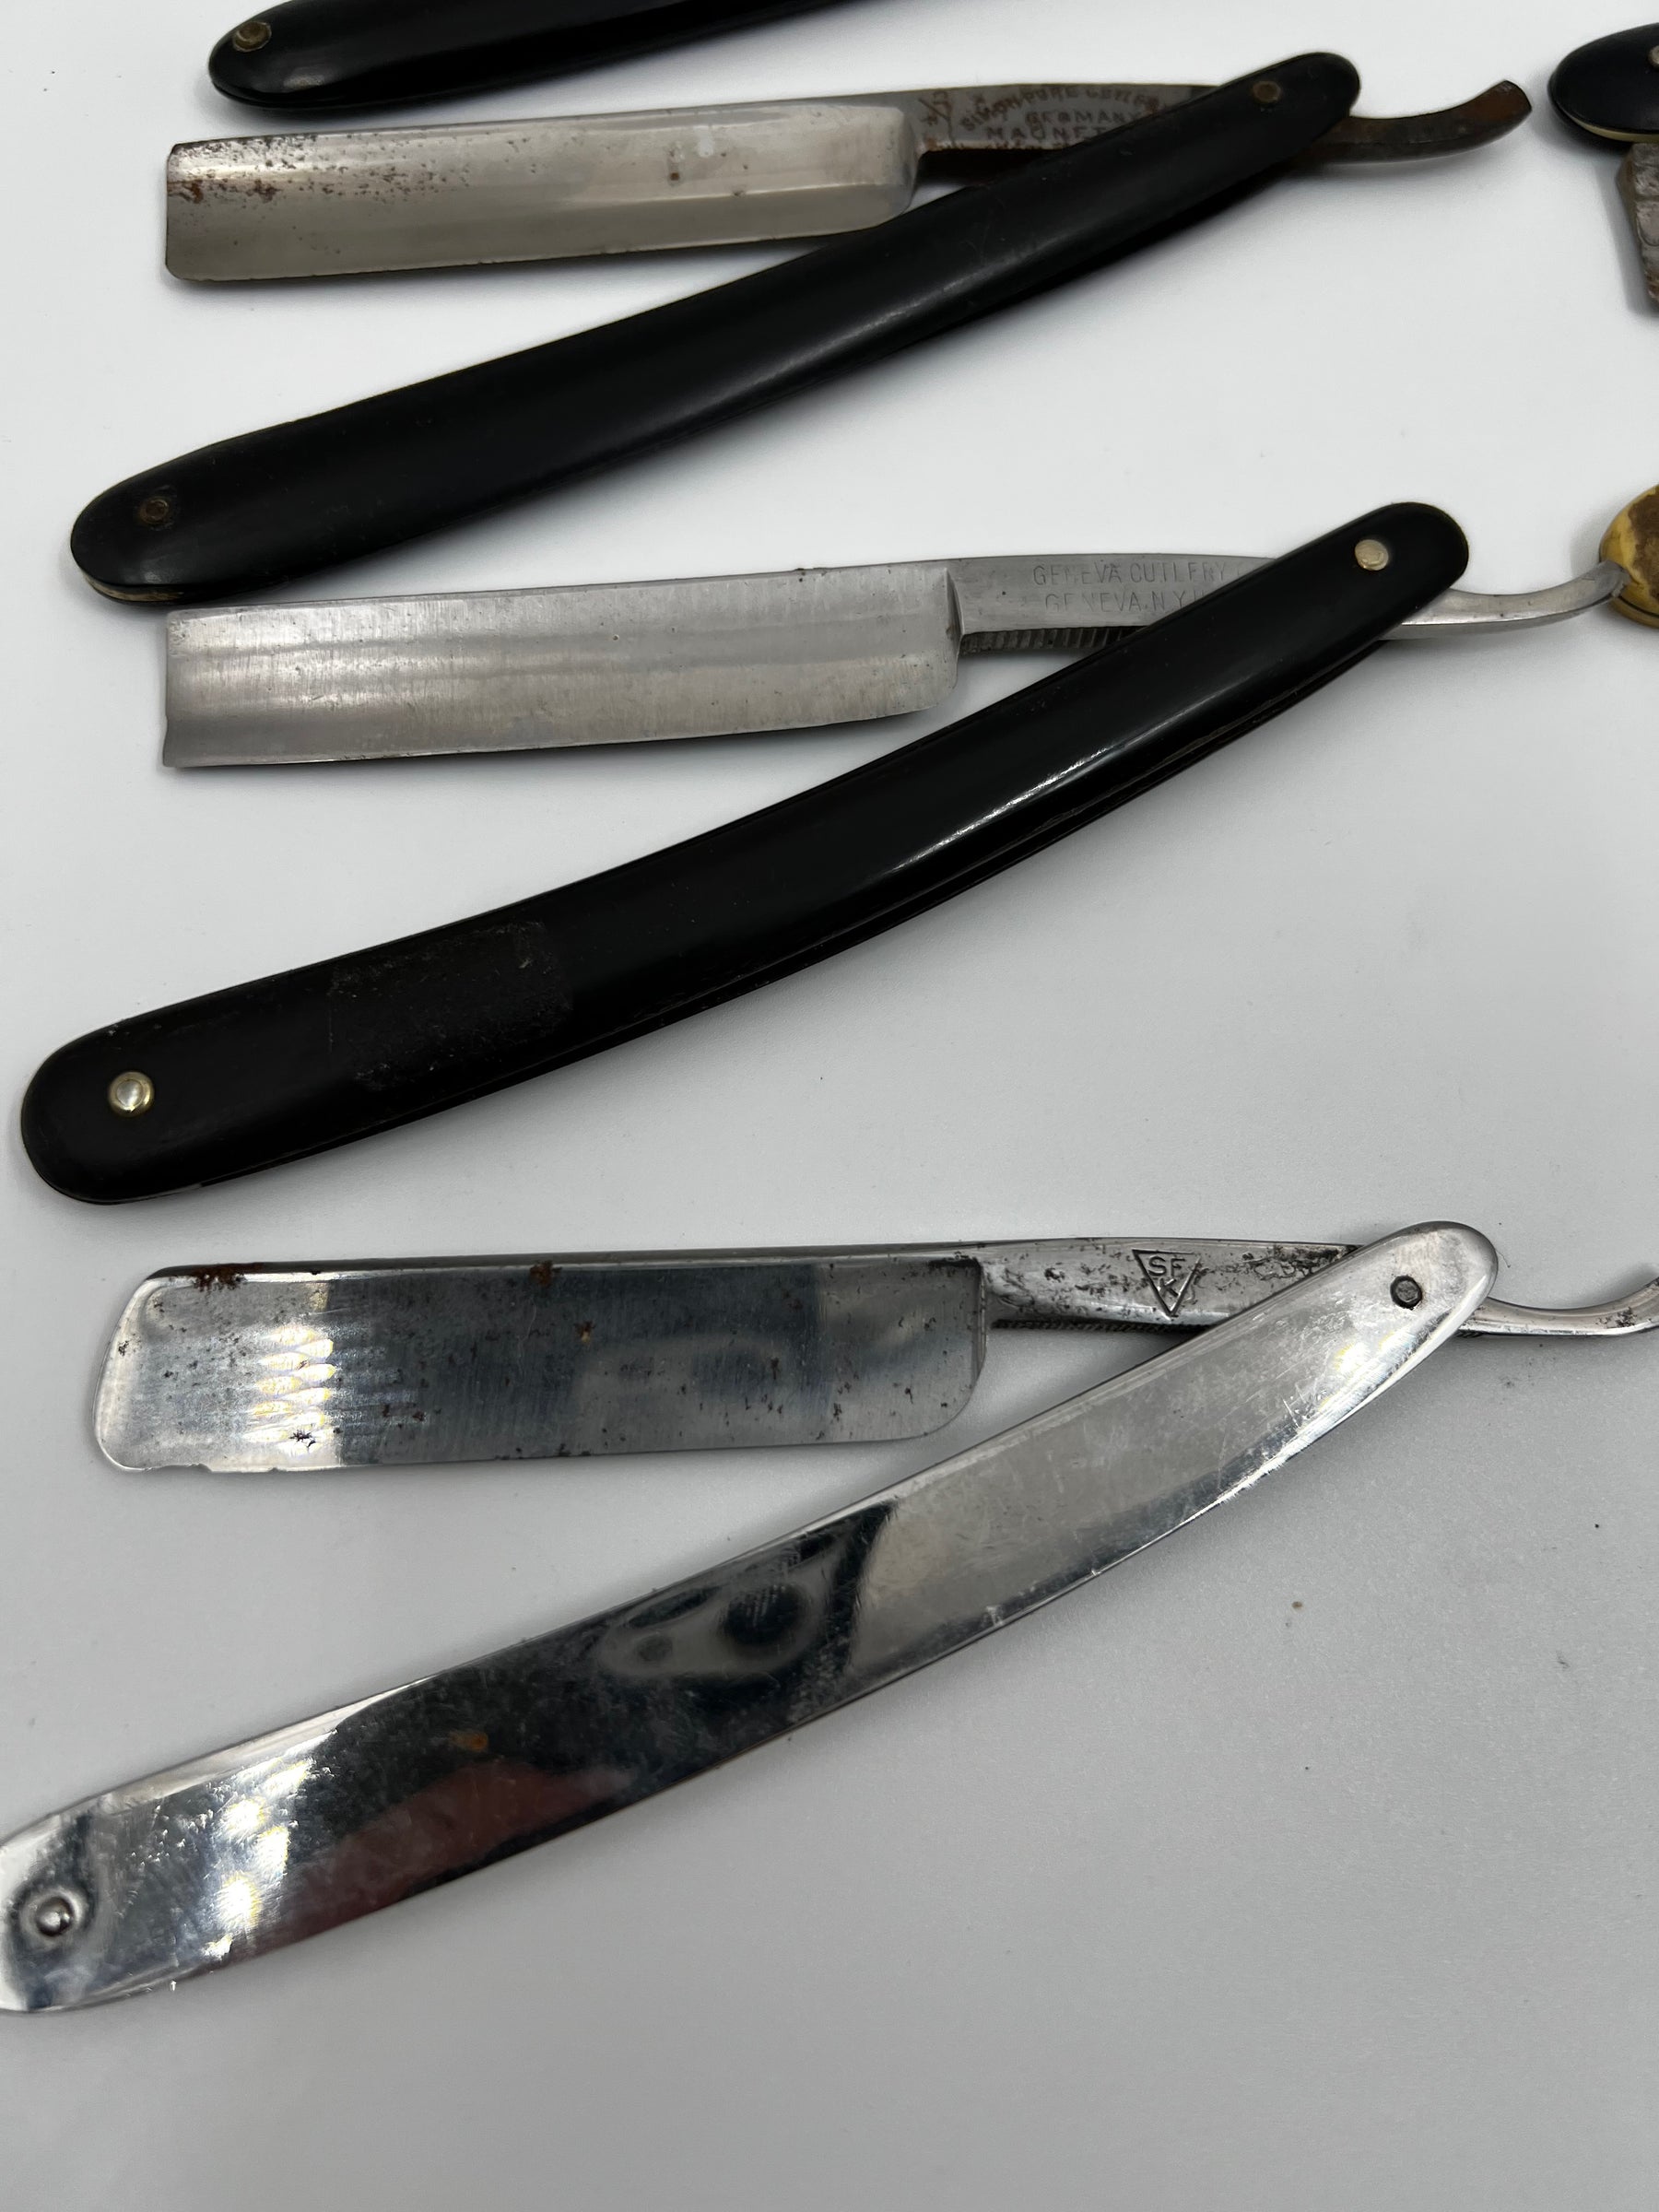 Vintage 10 Straight Razor Lot #15 - May Contain Sheffield, Solingen, Japanese & USA makers, as pictured